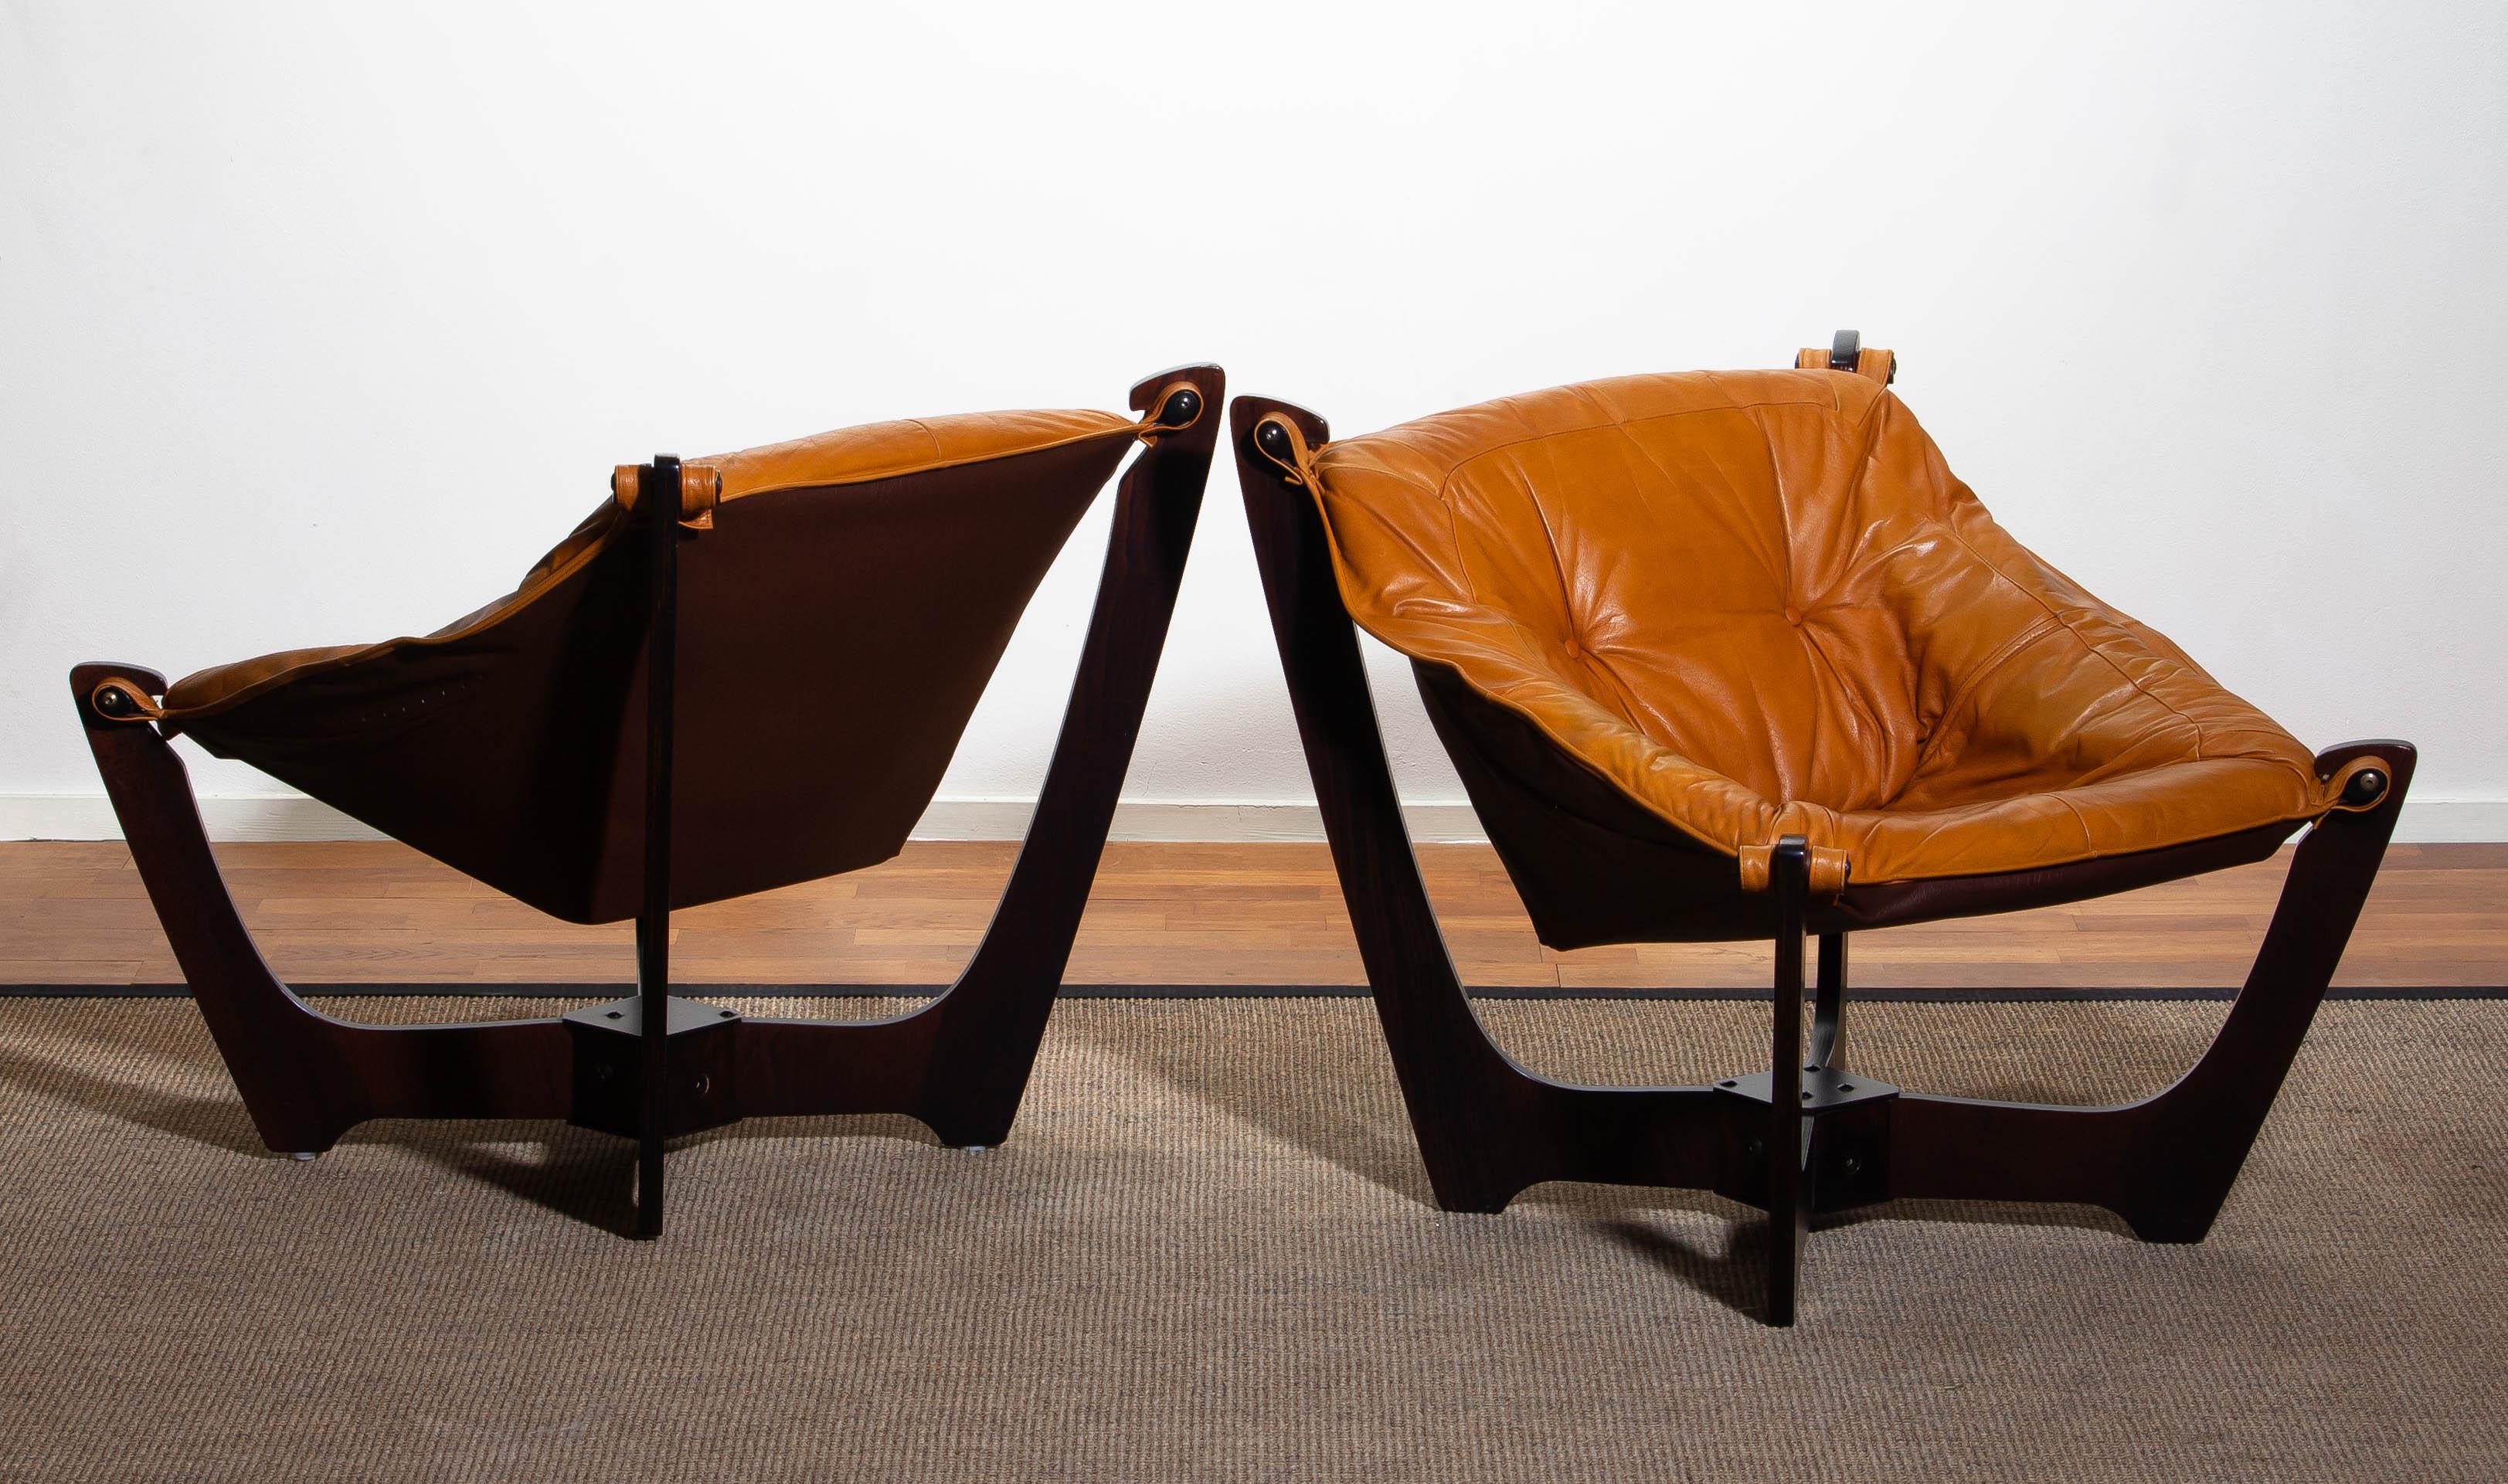 1970 Pair of Leather Lounge Chairs by Odd Knutsen for Hjellegjerde Møbler Norway 5